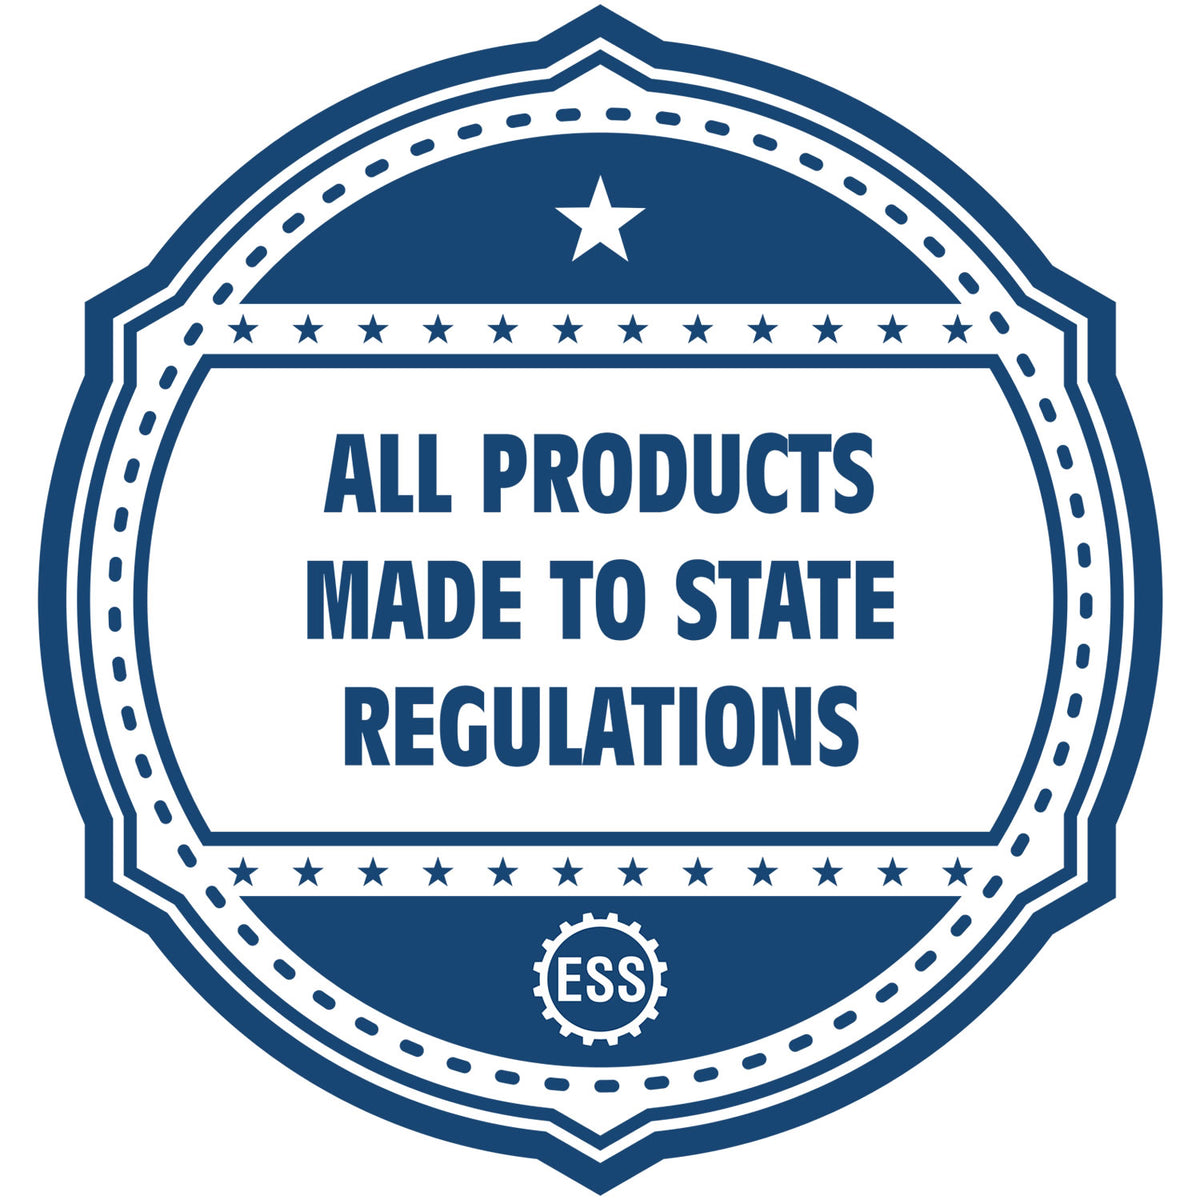 A blue icon or badge for the Slim Pre-Inked Wisconsin Professional Geologist Seal Stamp showing that this product is made in compliance with state regulations.